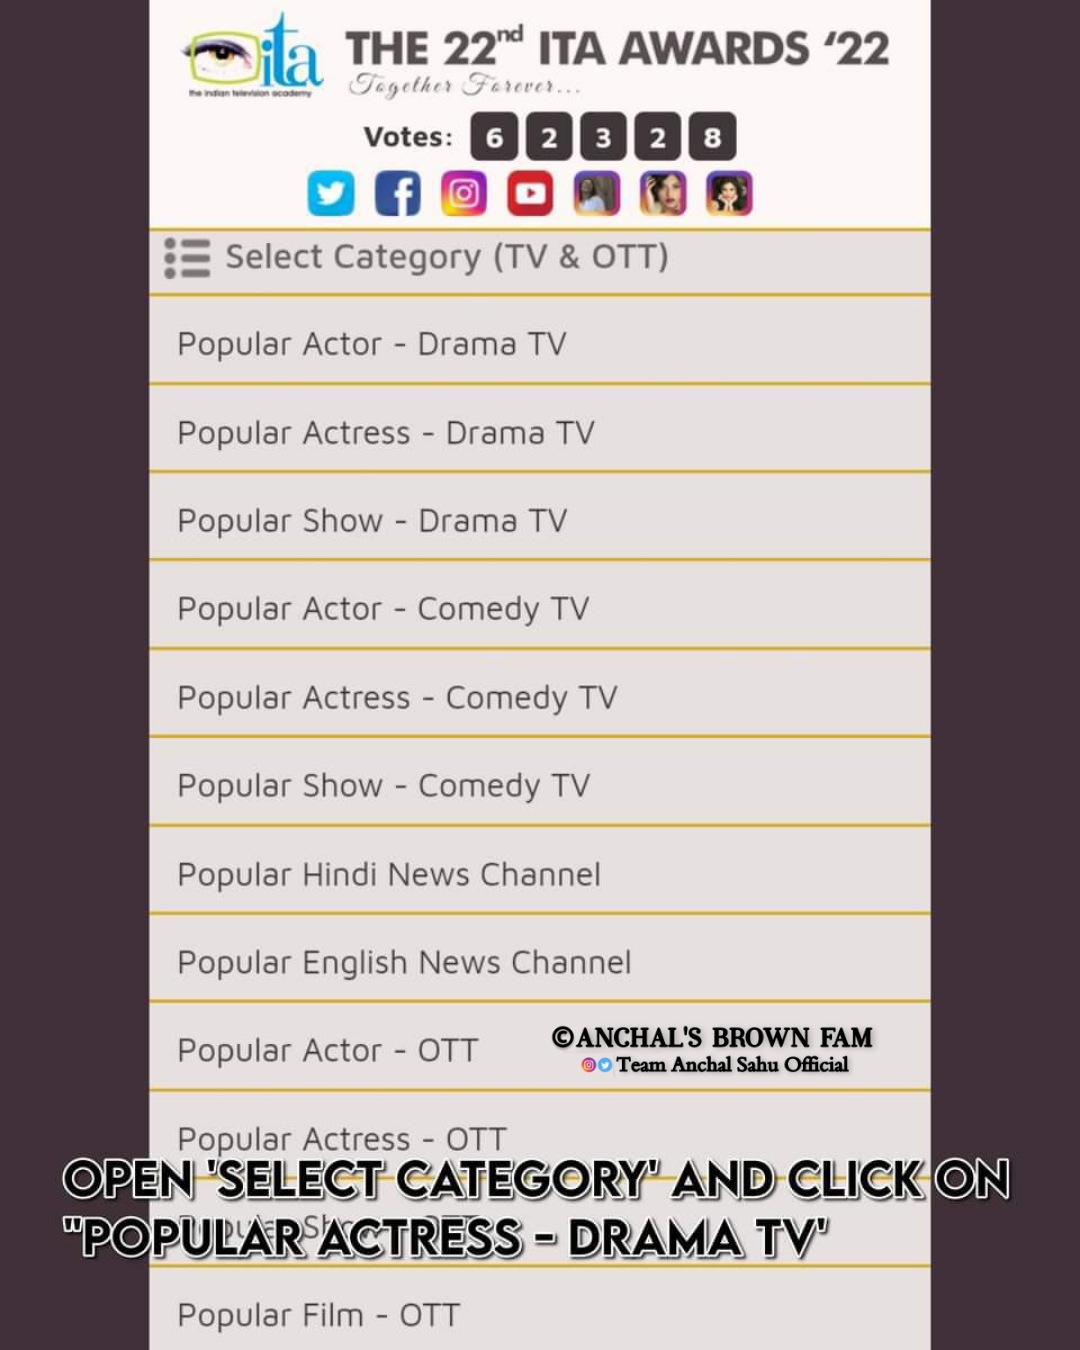 TEAM_ANCHALSAHUOFFICIAL on X: Here are the steps that you have to follow  while voting for our girl! #AnchalSahu #Anchalsbrownfam #TeamAnchalSahu  #Parineet #Parineetii #Bondita #BarristerBabu #Vashma #Kudca   / X